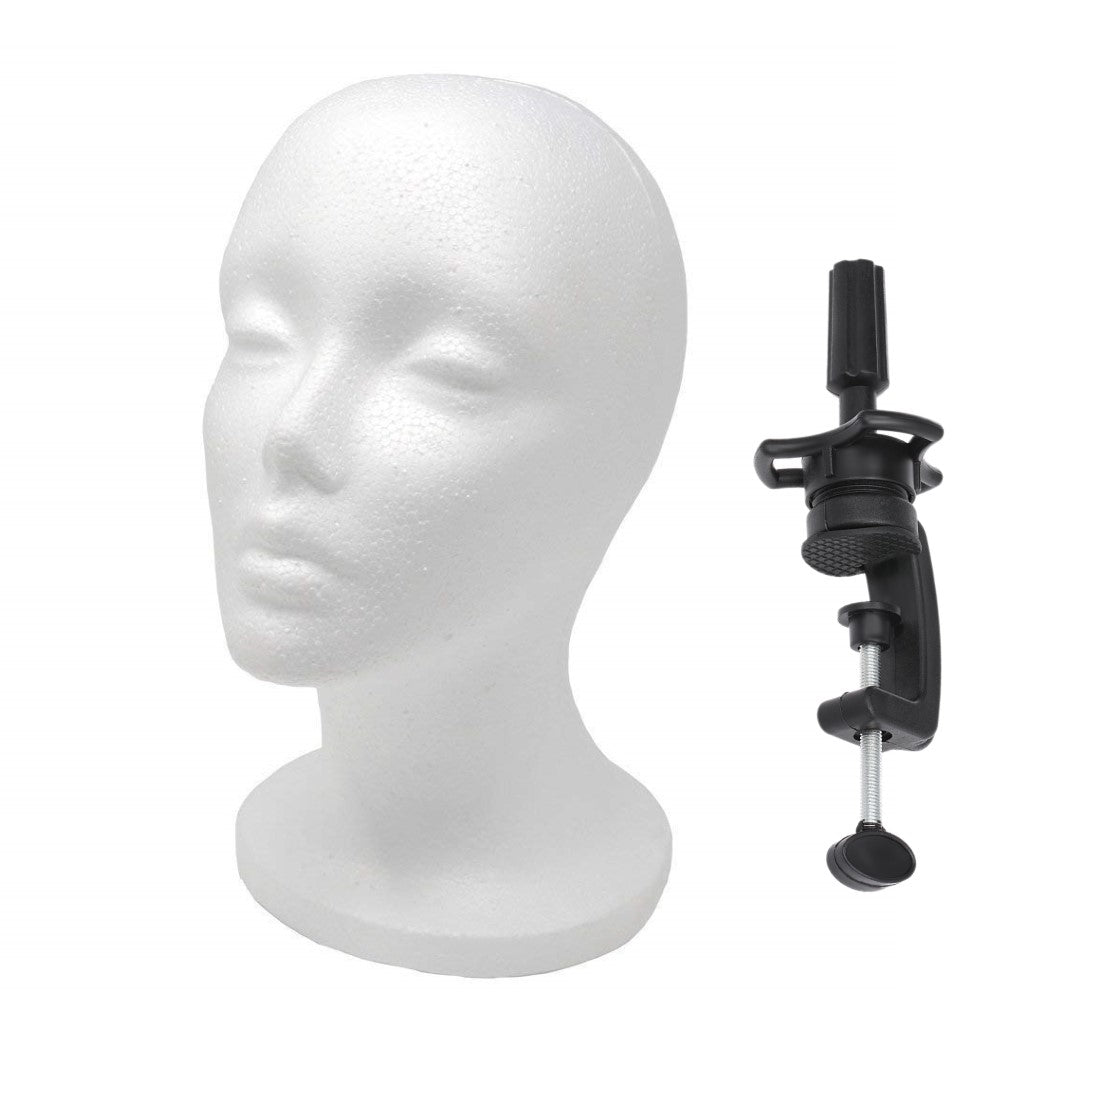 Hair Topper Styrofoam Wig Head and Portable Stand – TopHair Topper